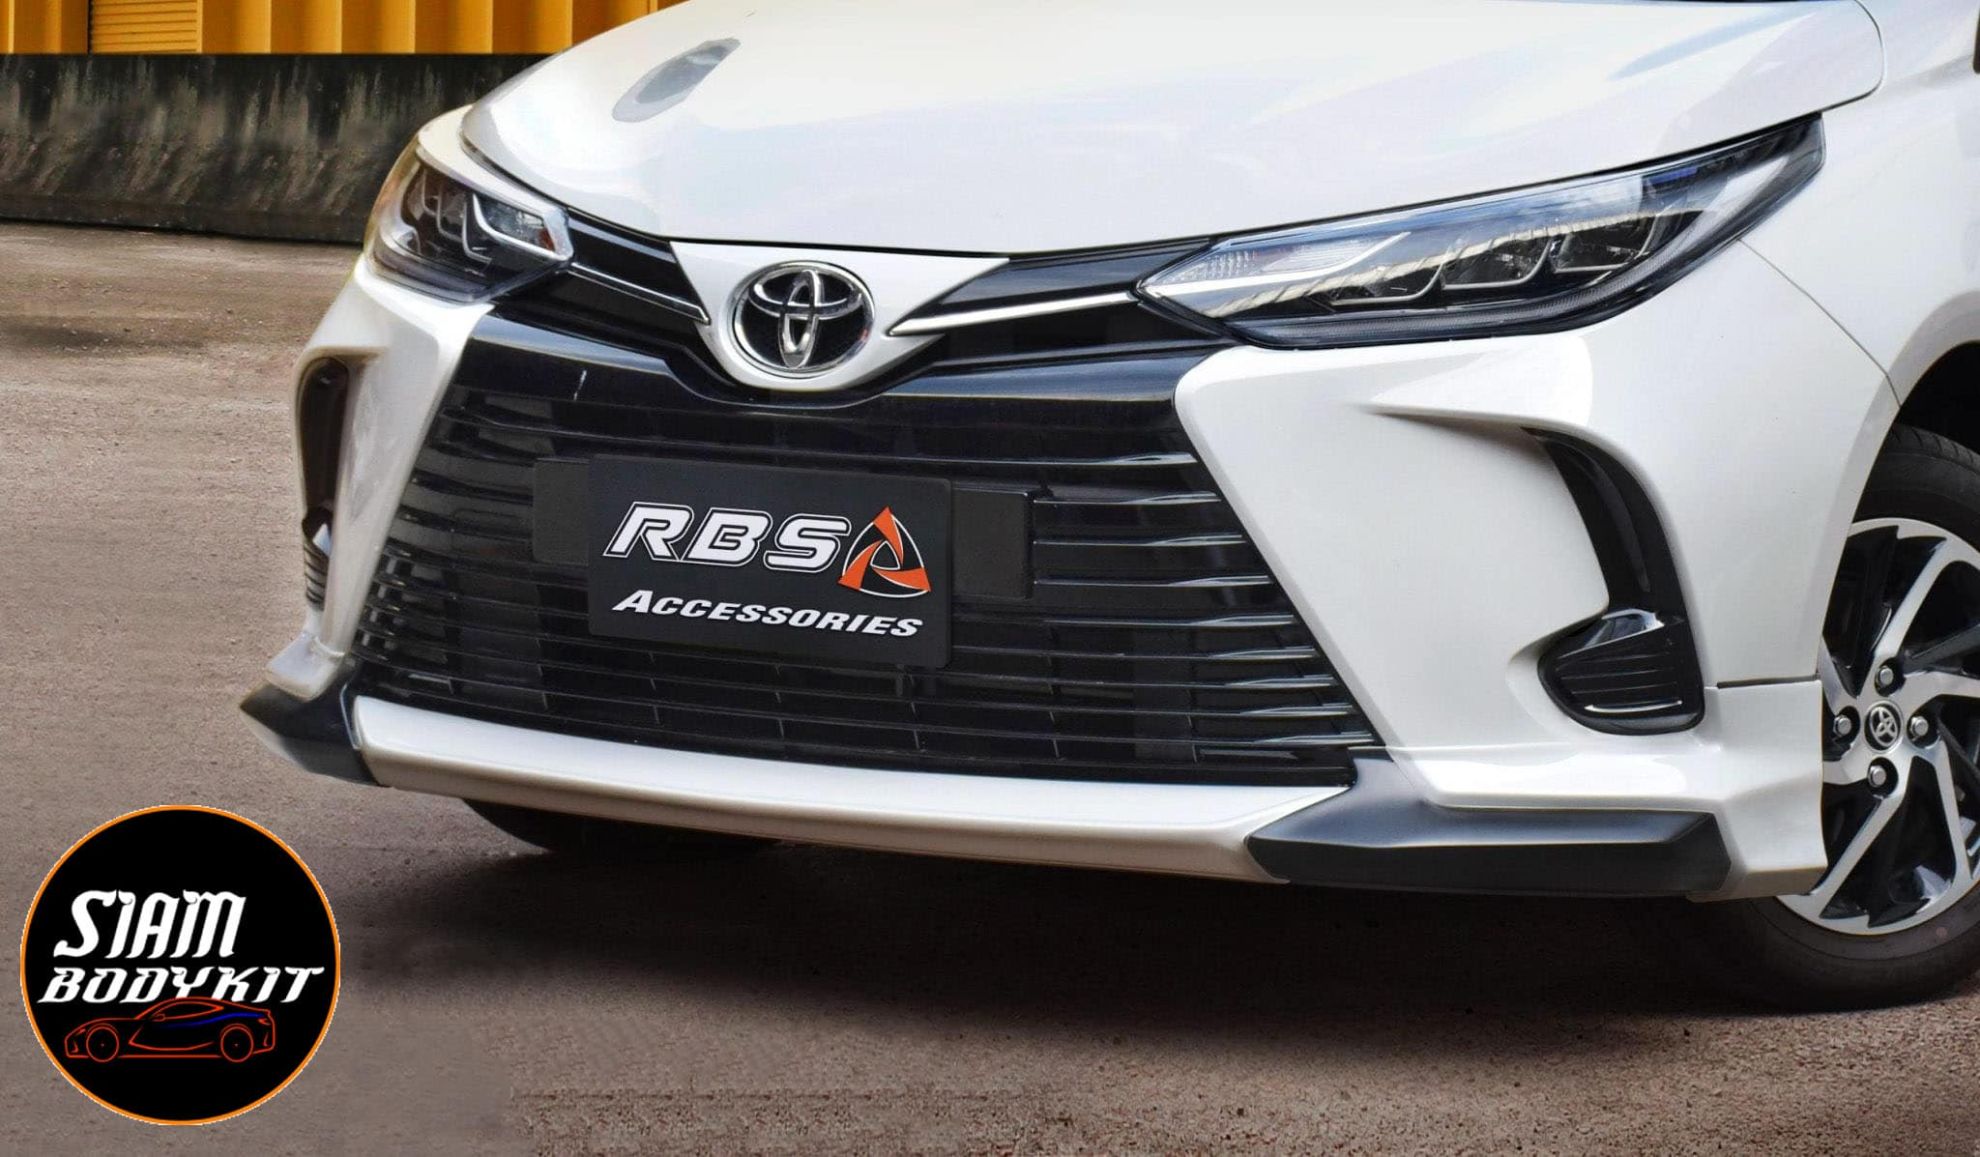 RBS Bodykit for Toyota Yaris Ativ 2020 (COLOR)